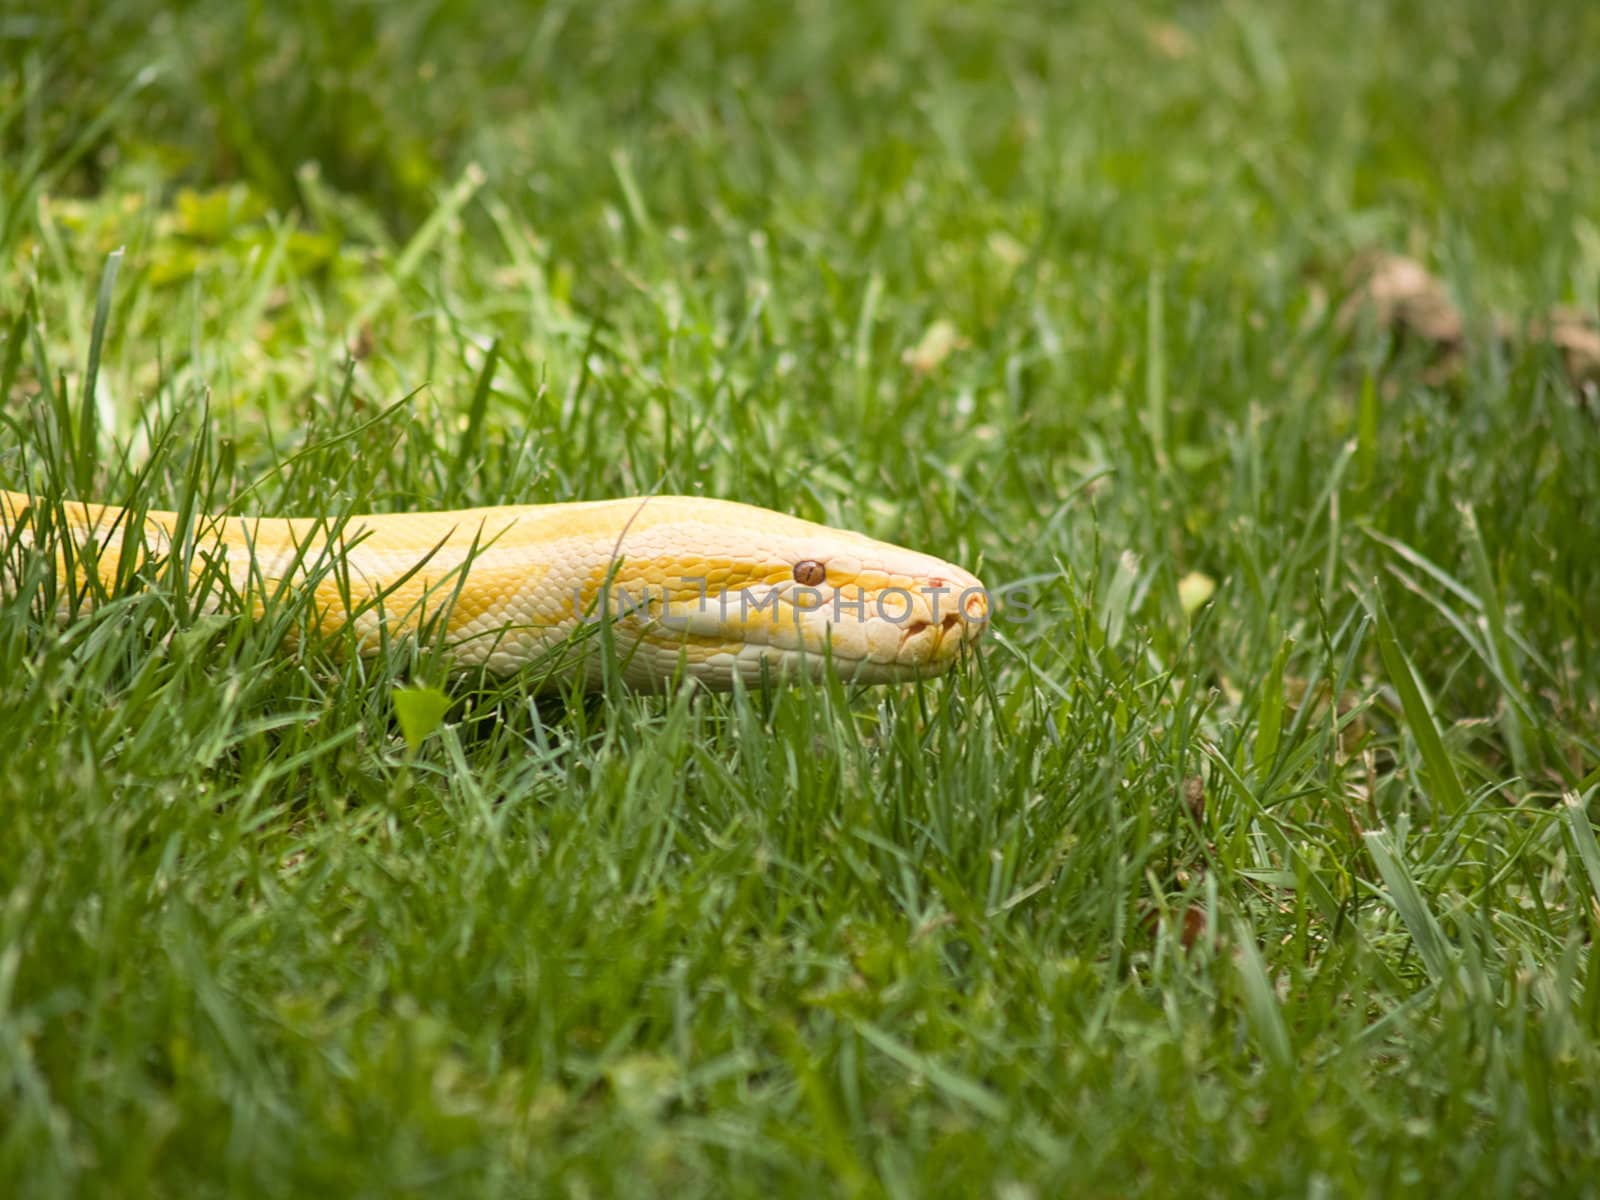 Albino Python slithering in the grass, making people nervous.